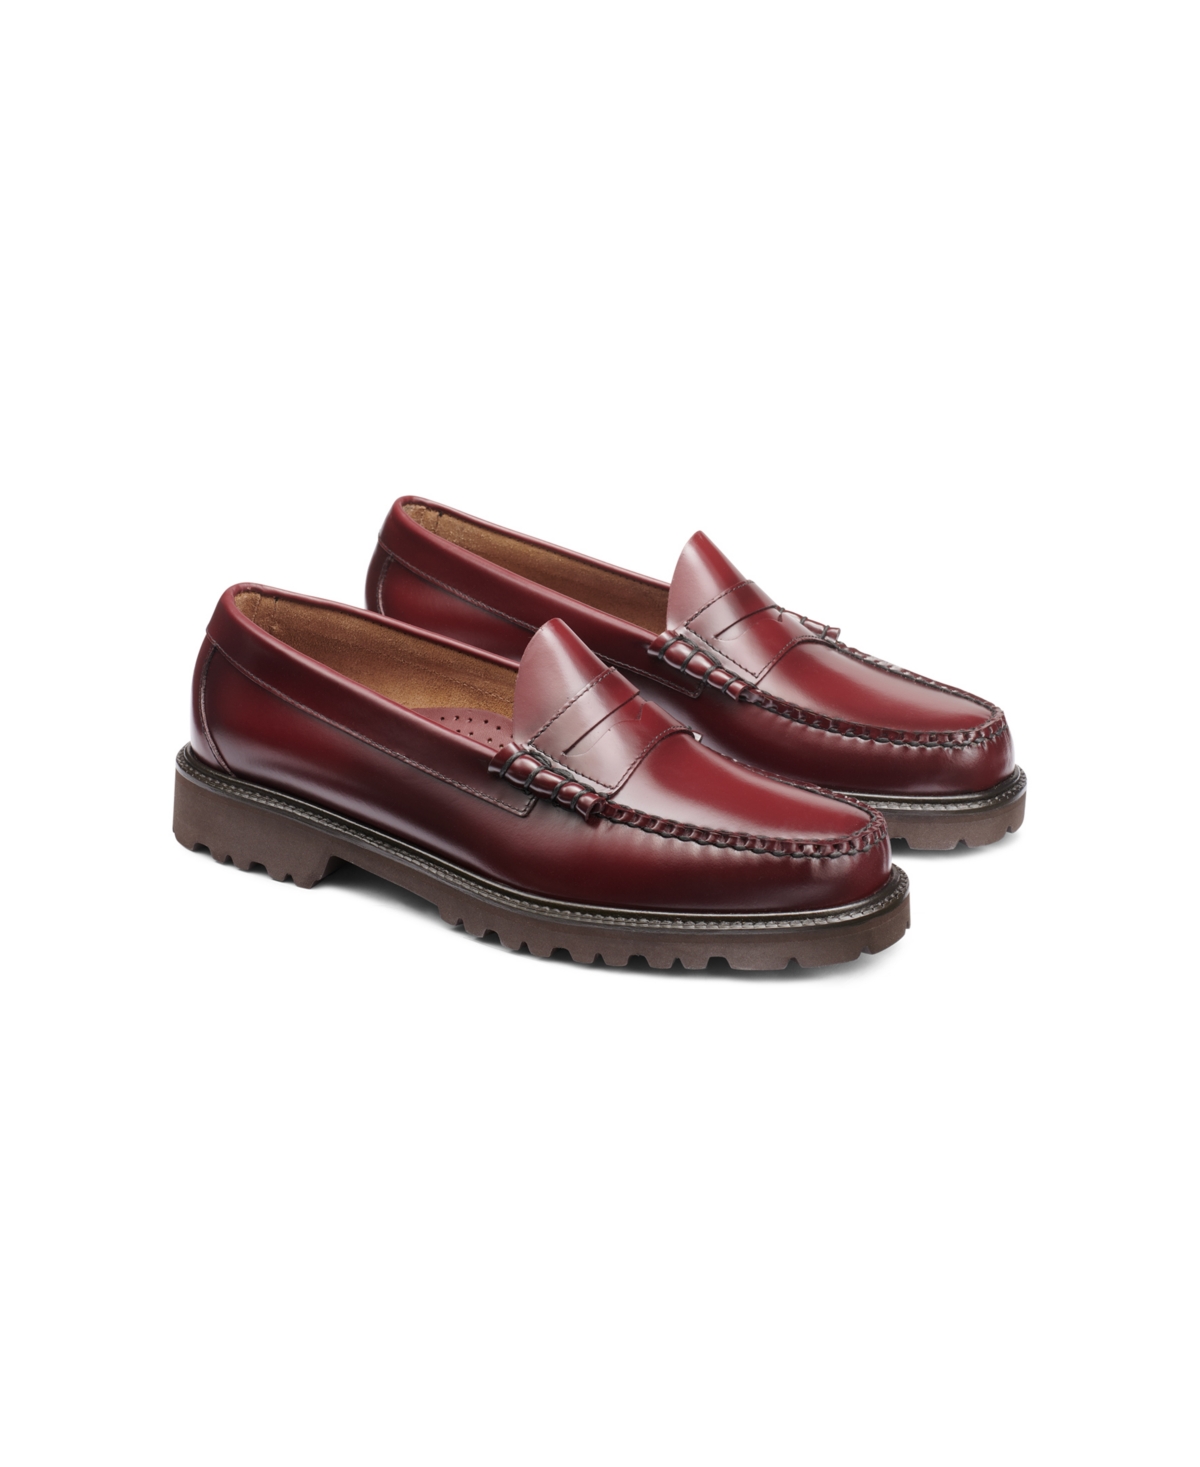 G.h.bass Men's Larson Lug Weejuns Penny Loafers - Whiskey